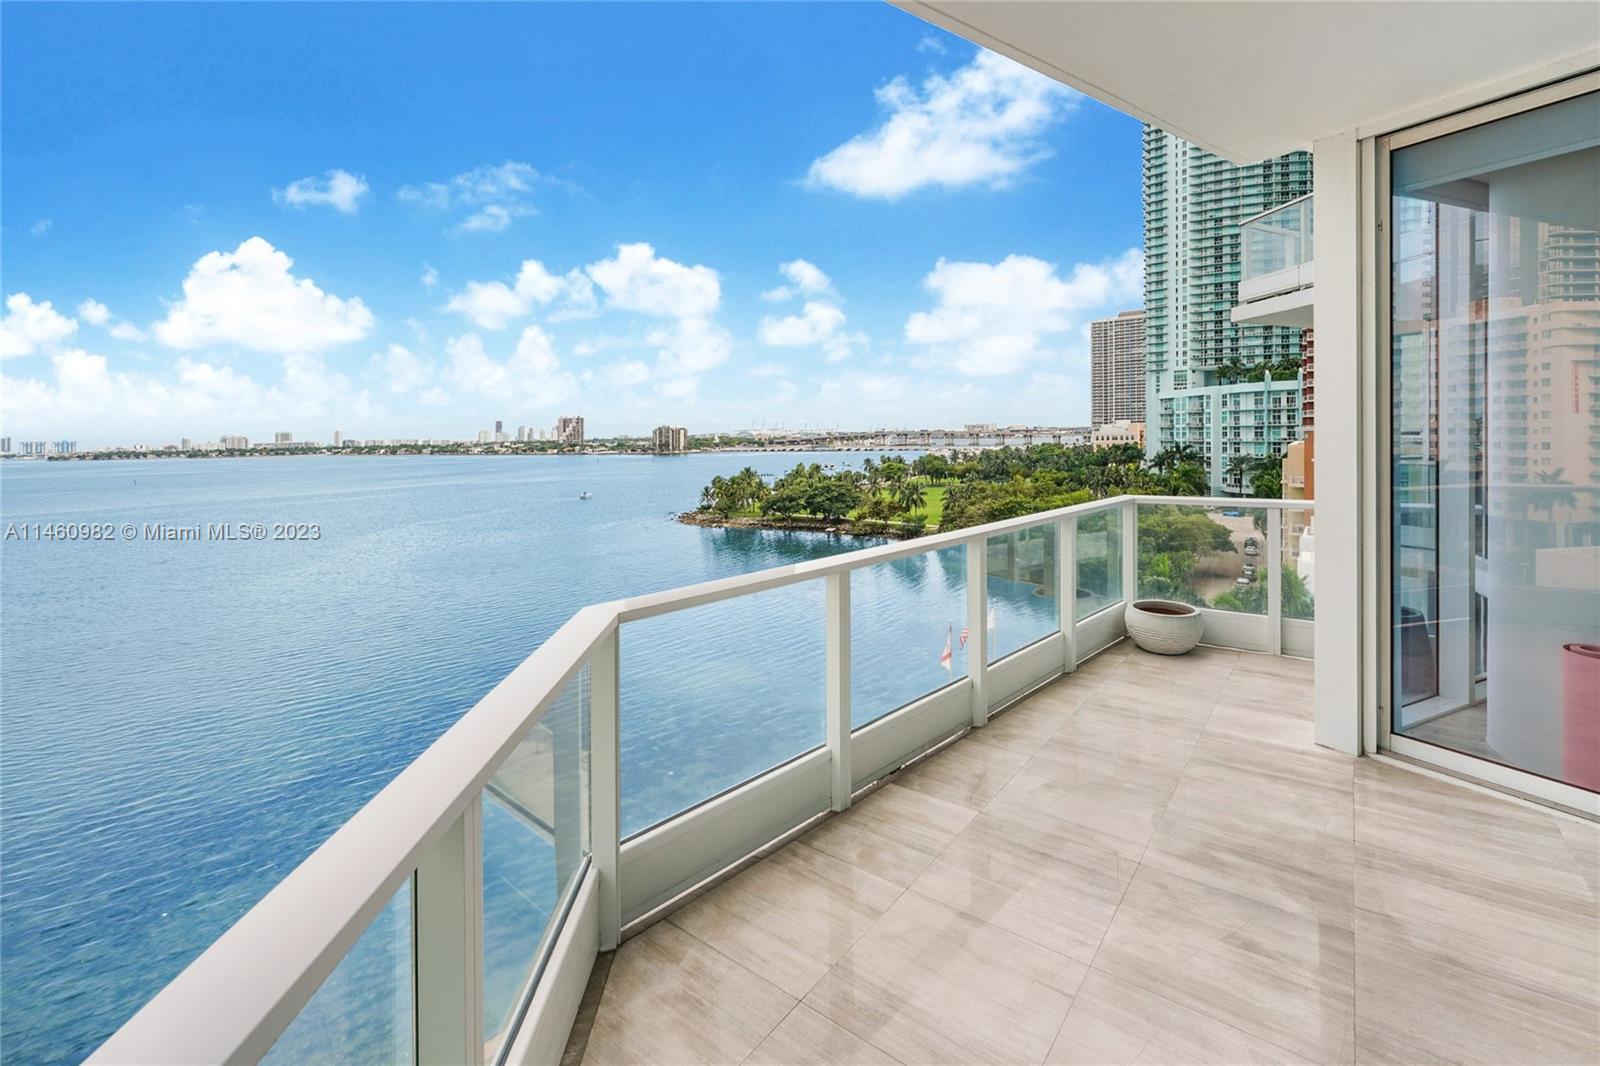 This beautiful 2 Bed 2.5 Bath condo at Paramount Bay boasts a stunning direct East water view.  A pr